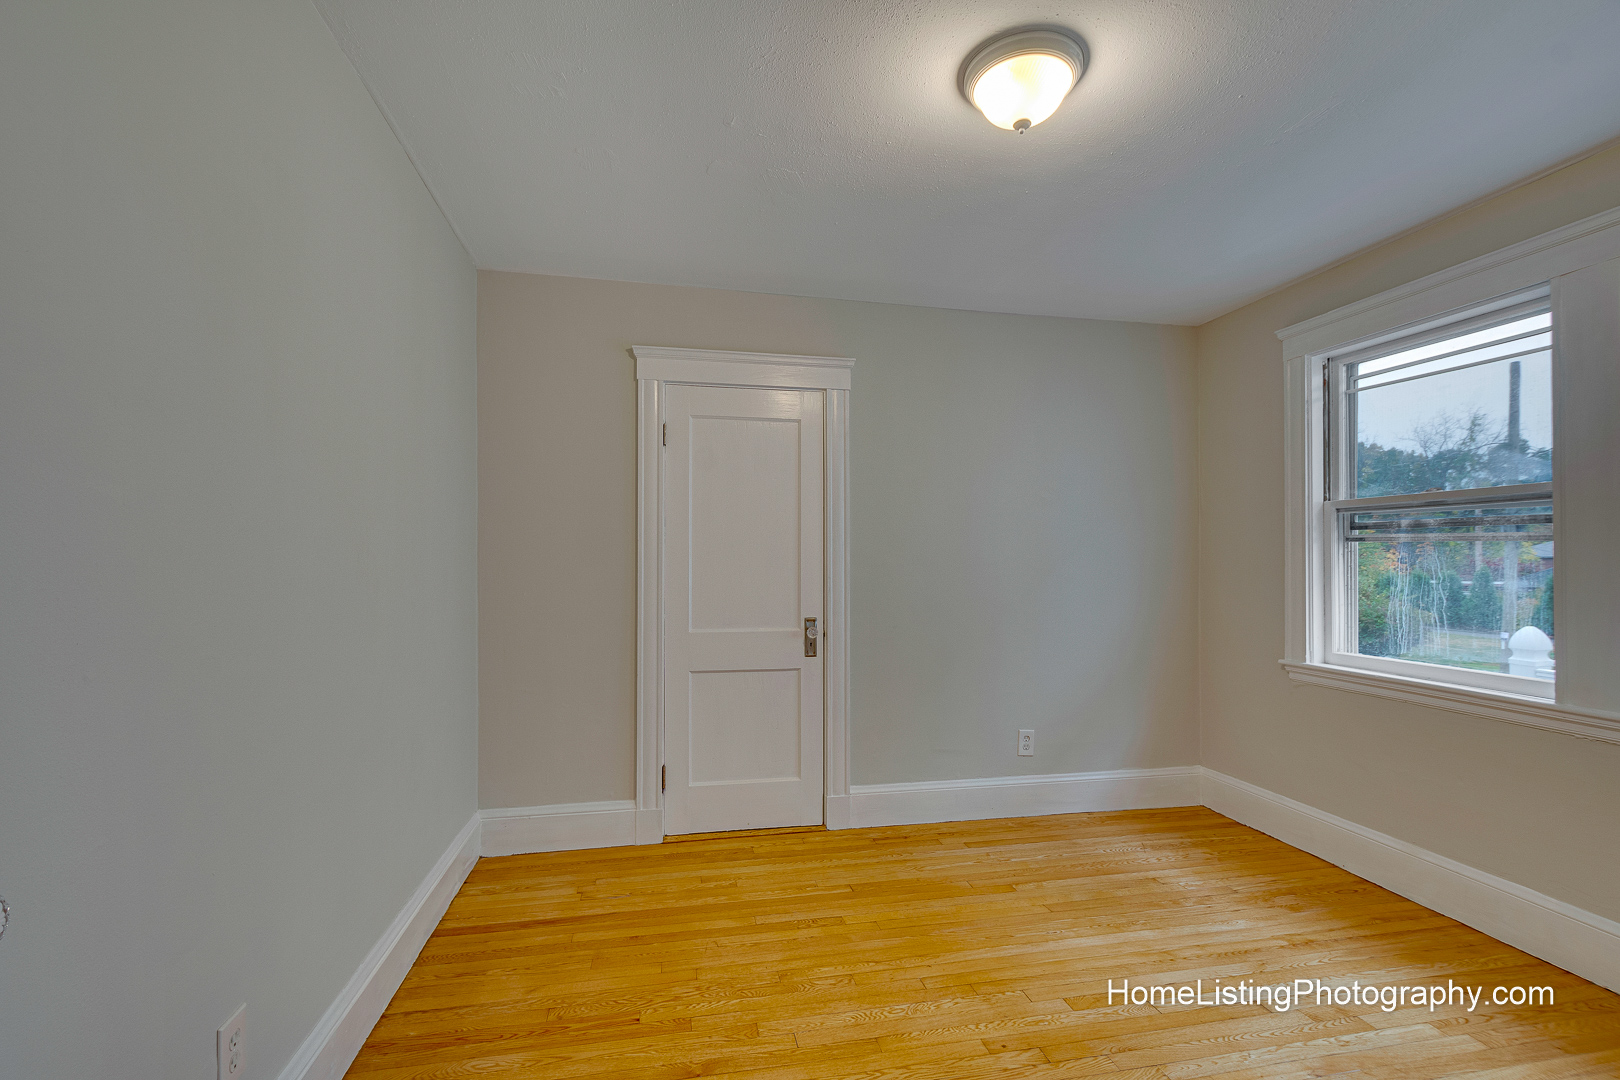 Thomas Adach - Brighton MA professional real estate photographer - 508-655-2225 Home Listing Photography